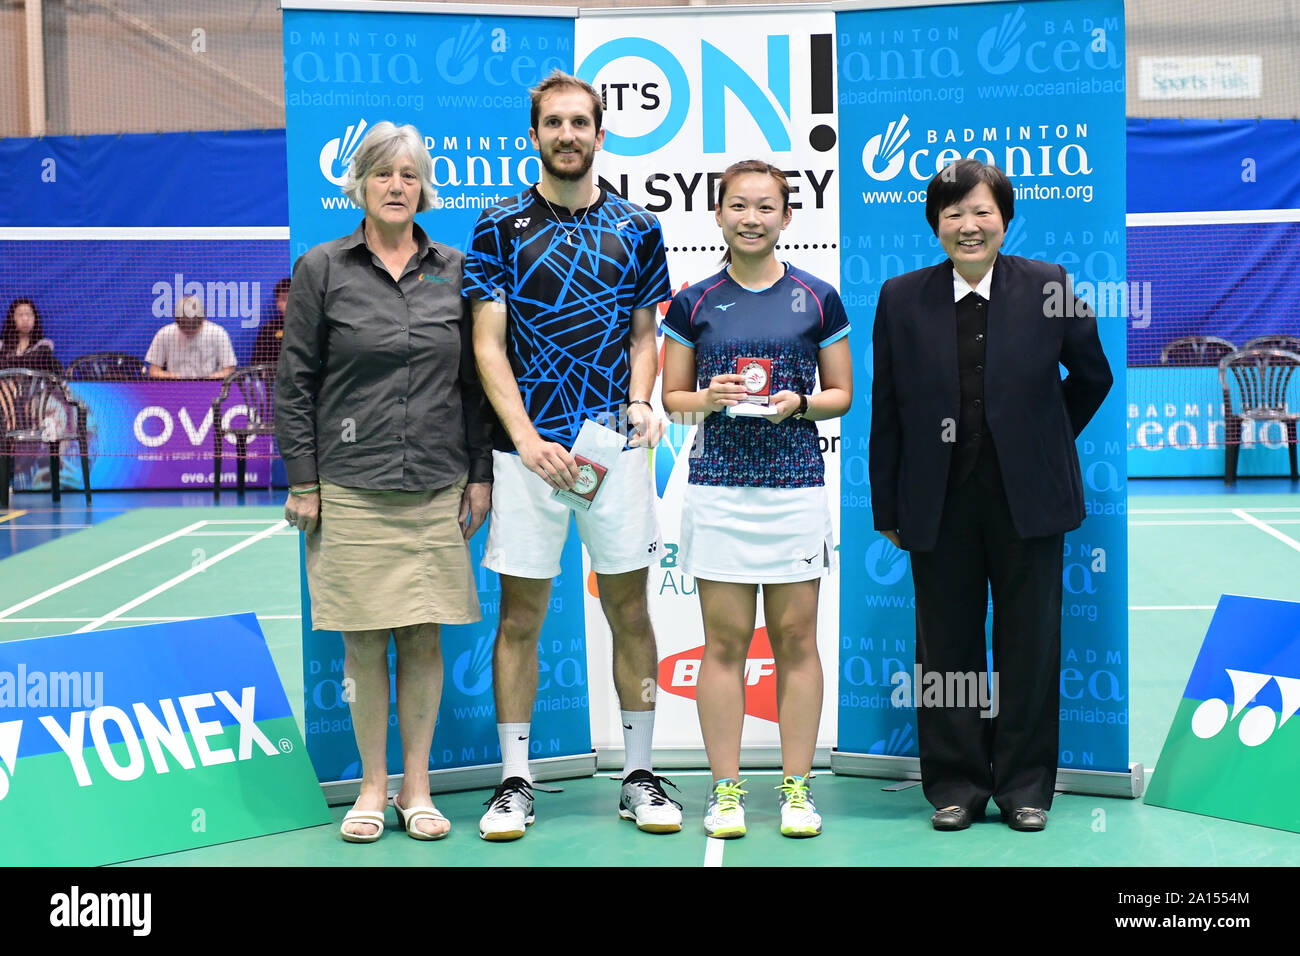 Oliver Leydon-Davis and Anona Pak (New Zealand) are seen during the Mixed Doubles medal awarding ceremony of the 2019 Sydney International.  Leydon-Davis and Pak won the silver medal Seen from left to right: President for Oceania Badminton Confederation Geraldine Brown, Leydon-Davis, Pak and Badminton NSW President Carolyn Toh. Stock Photo